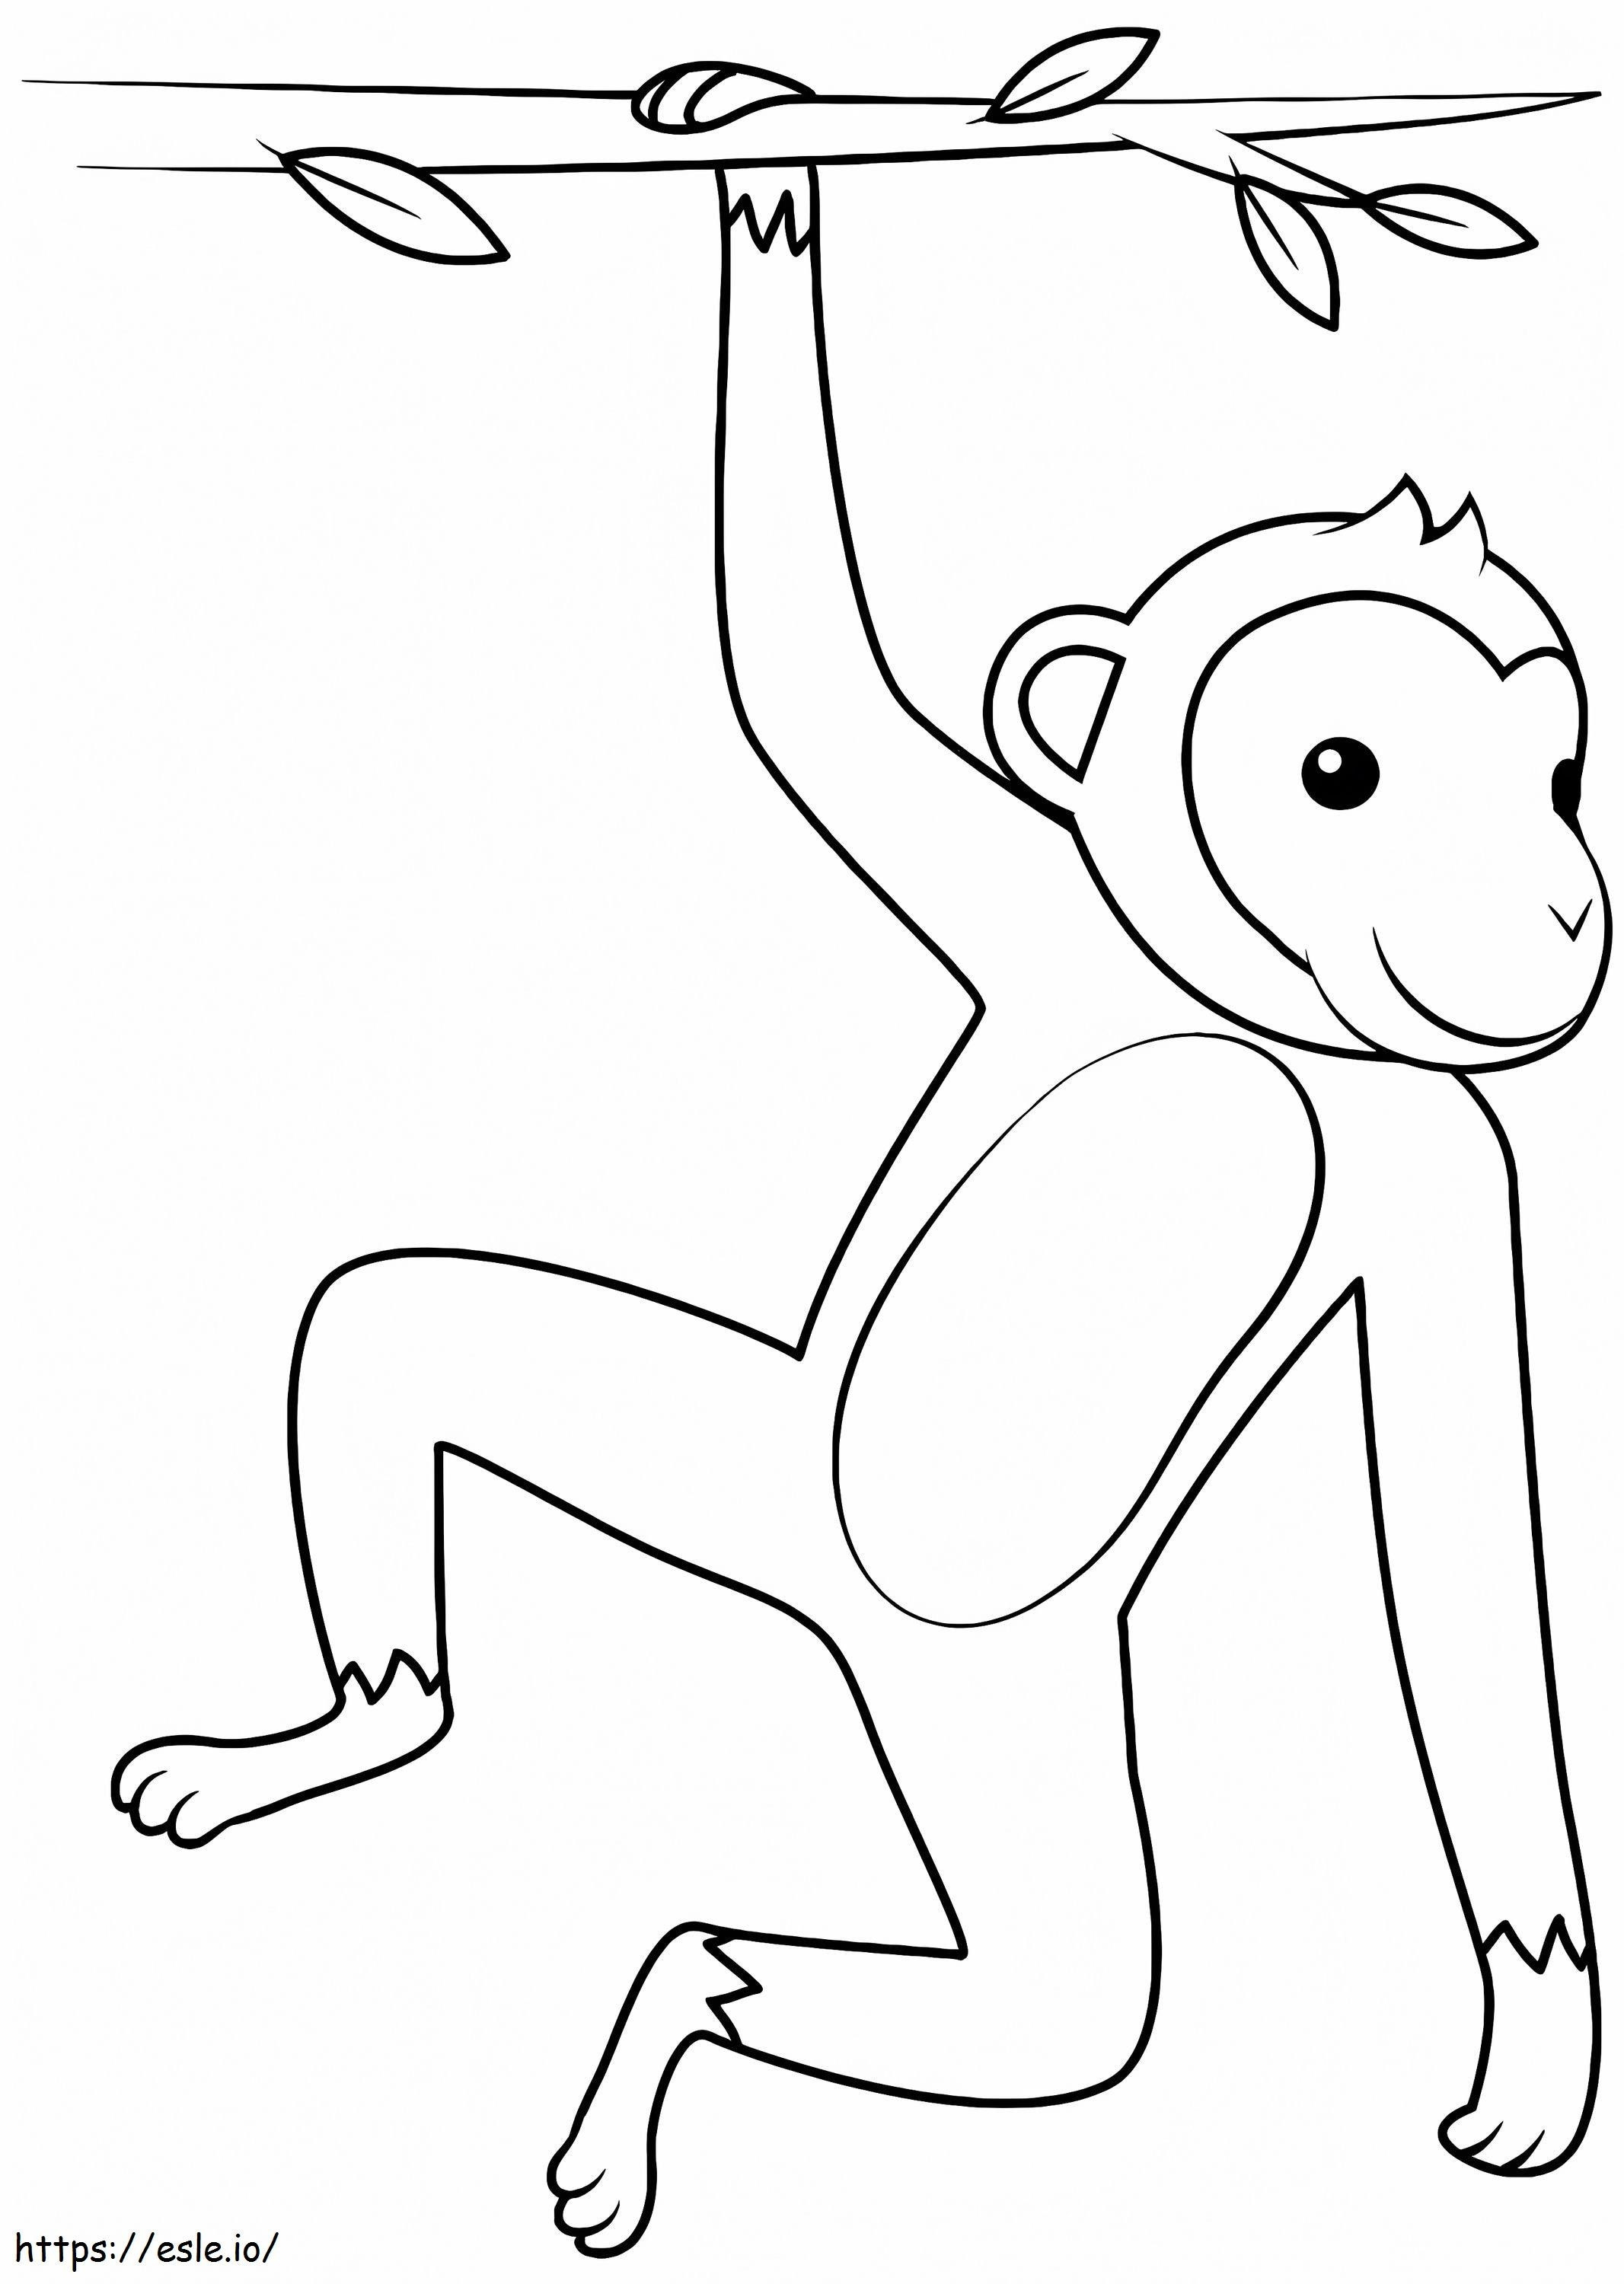 Hanging Monkey coloring page